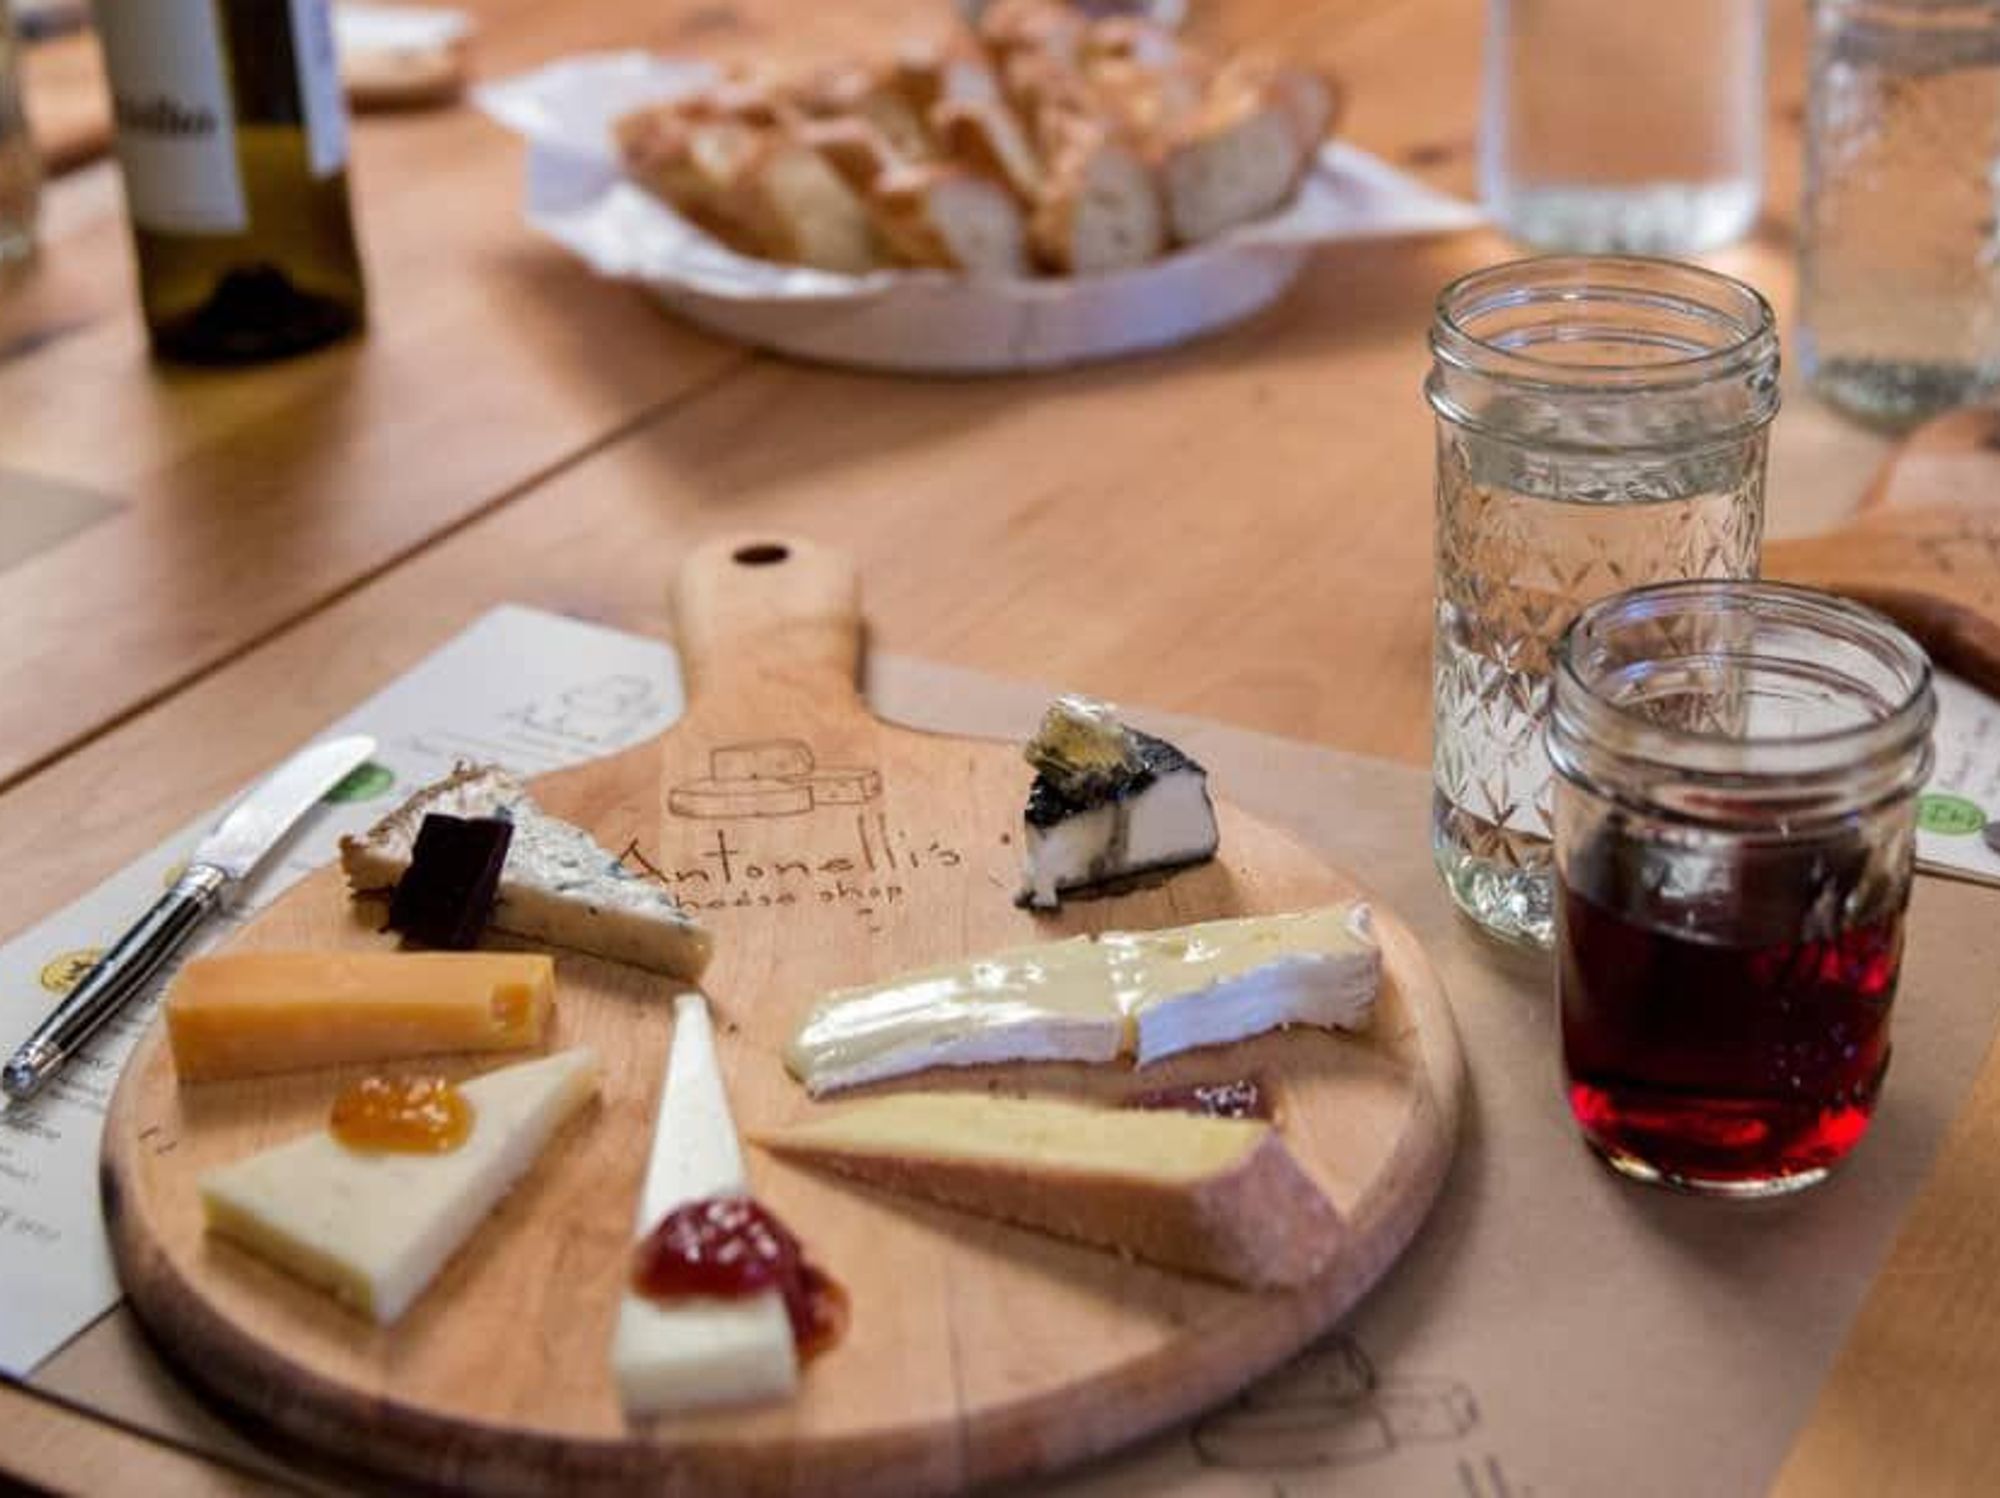 Cheese board by Antonelli's